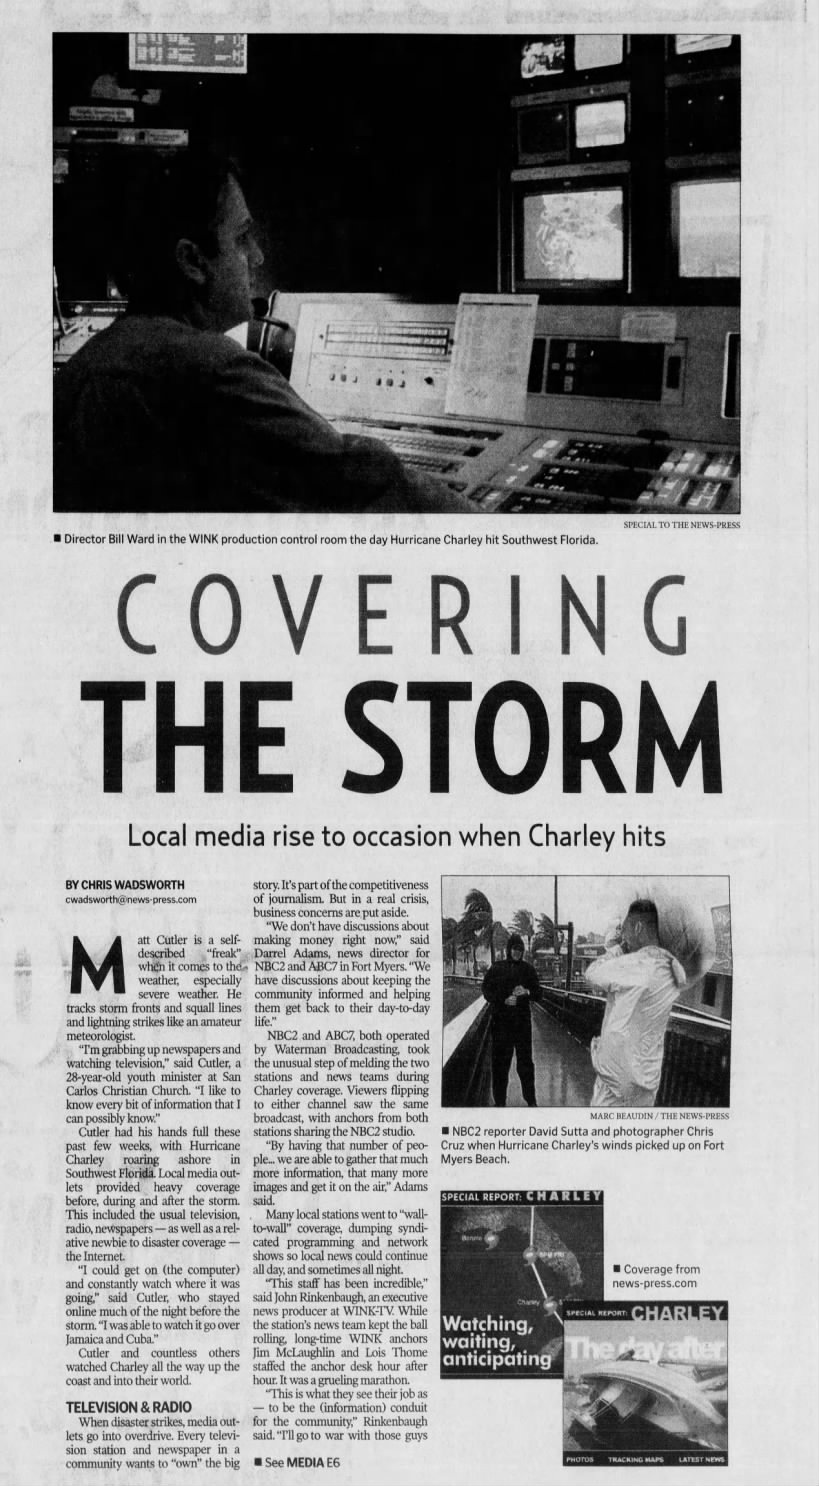 Covering the storm: Local media rise to occasion when Charley hits